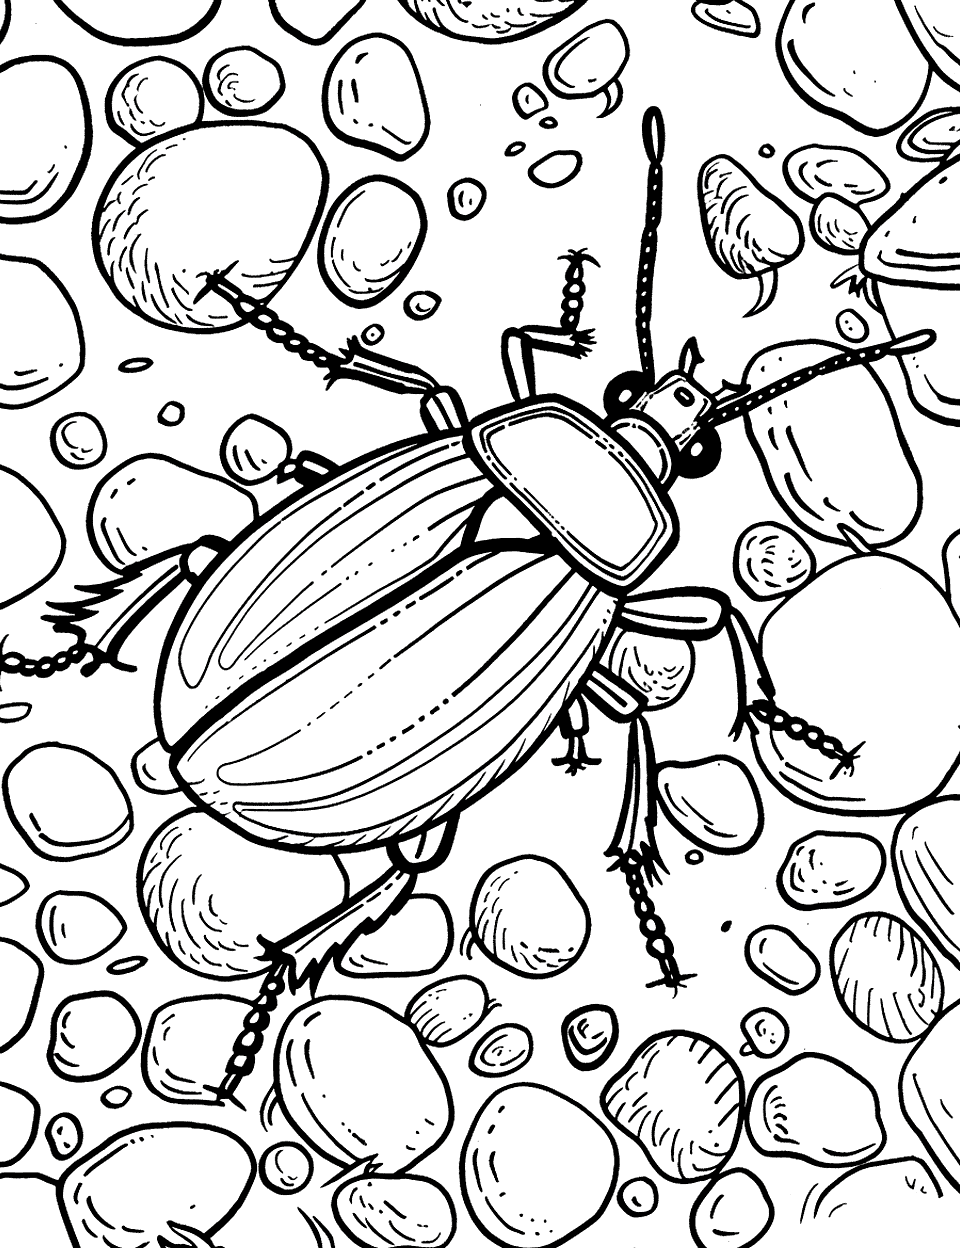 Beetle Scuttling Over Pebbles Insect Coloring Page - A beetle moving briskly across a path covered with pebbles.